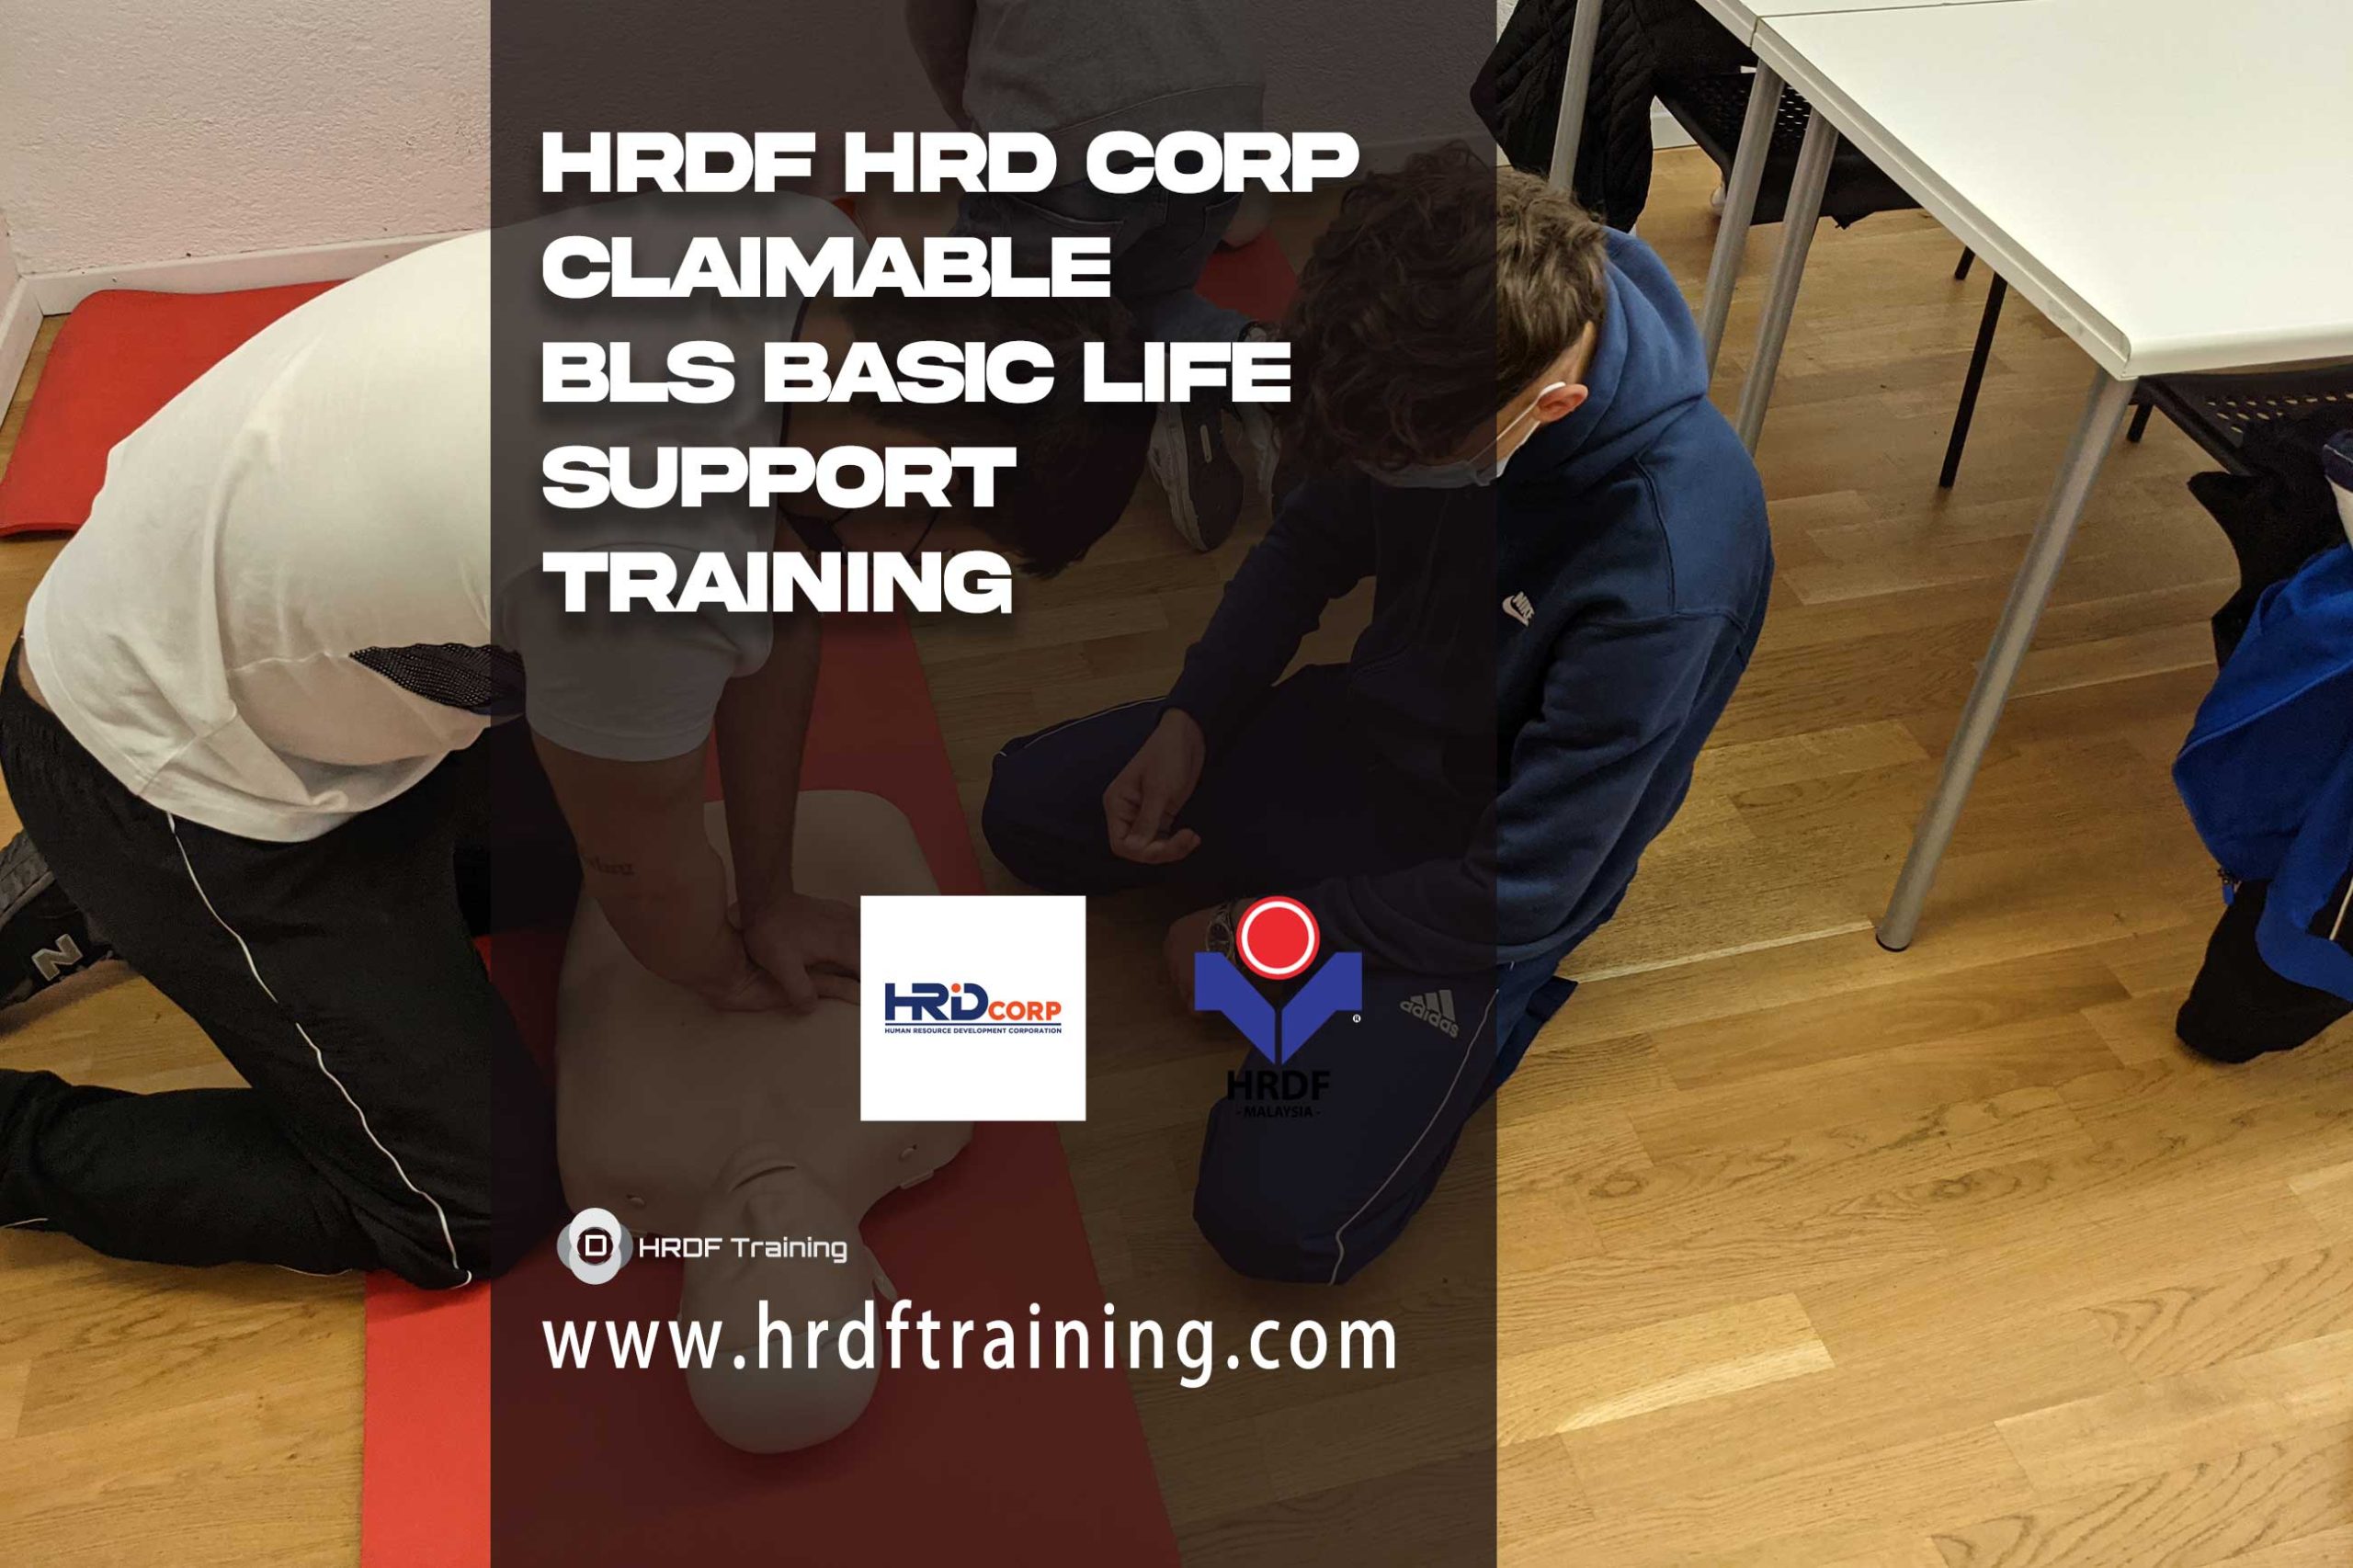 HRDF-HRD-Corp-Claimable-BLS-Basic-Life-Support-Training